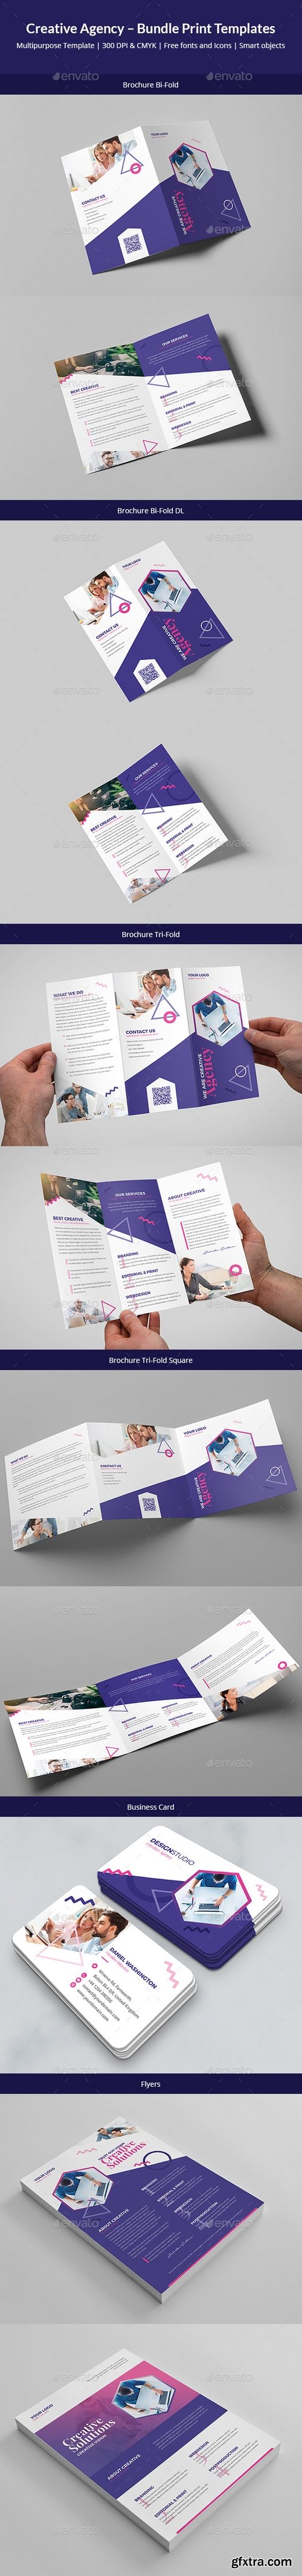 Graphicriver - Creative Agency – Bundle Print Templates 6 in 1 20961506